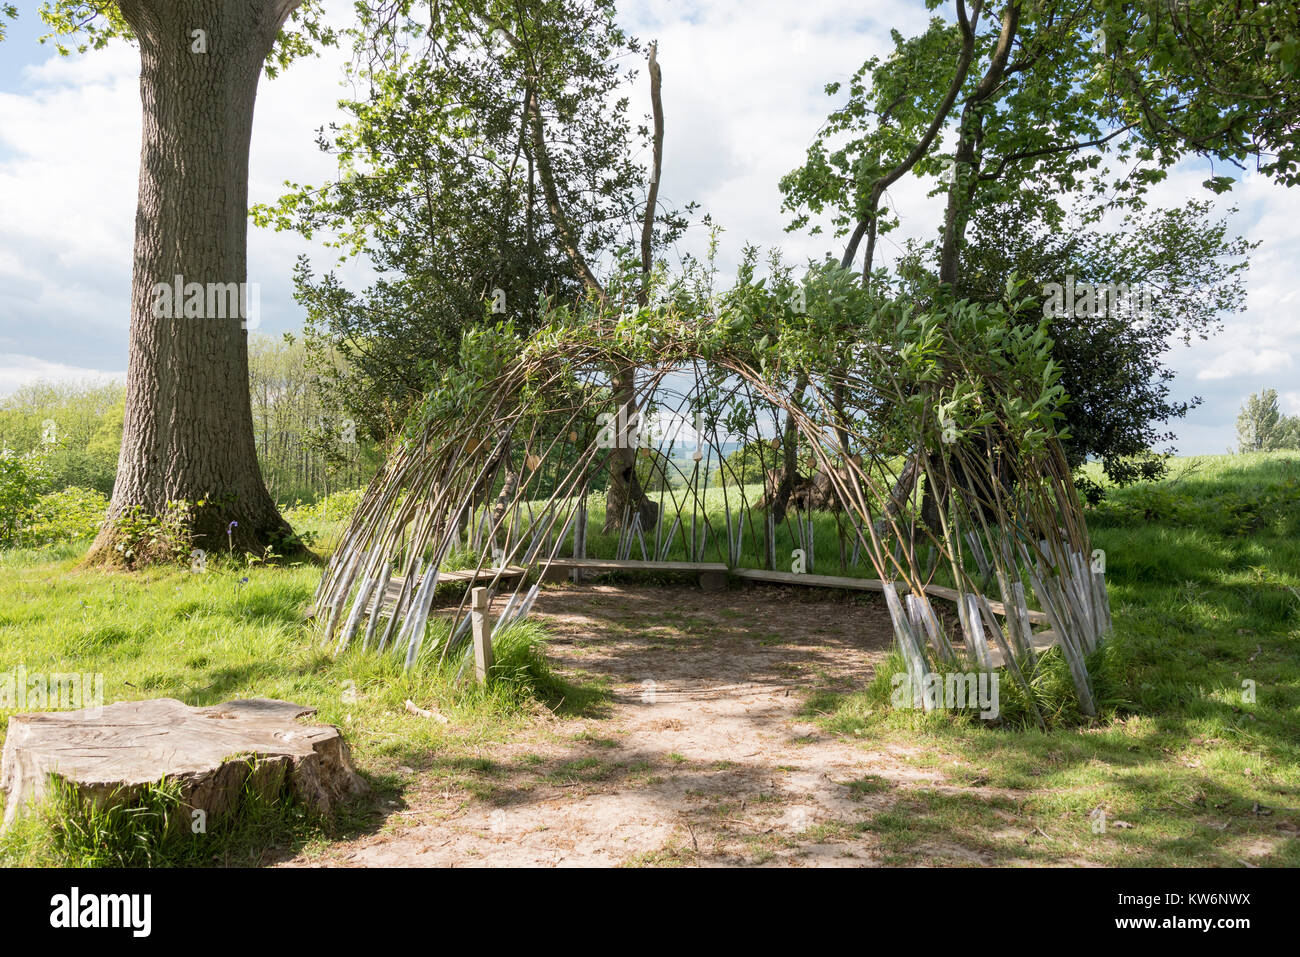 Small hut made out of living willow trees Stock Photo